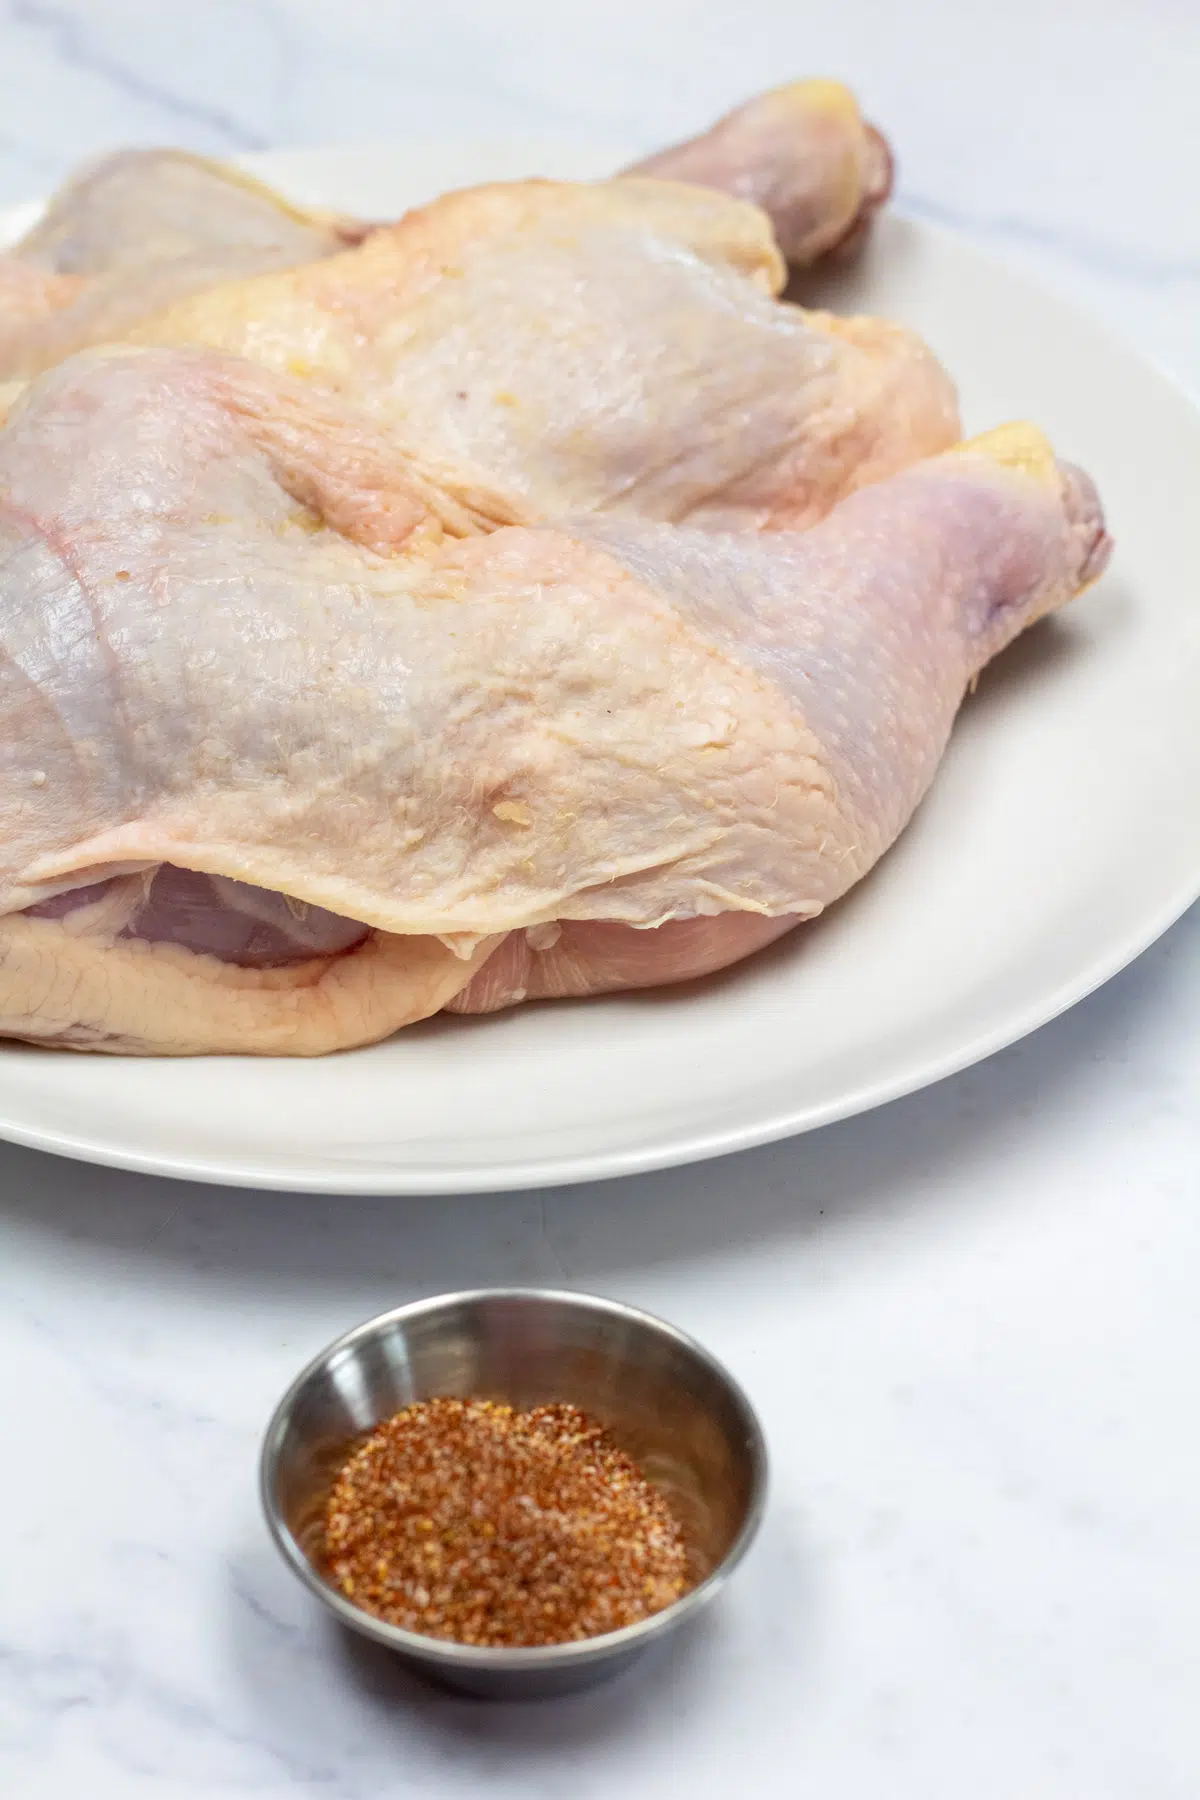 Tall photo showing chicken leg quarters and seasoning.